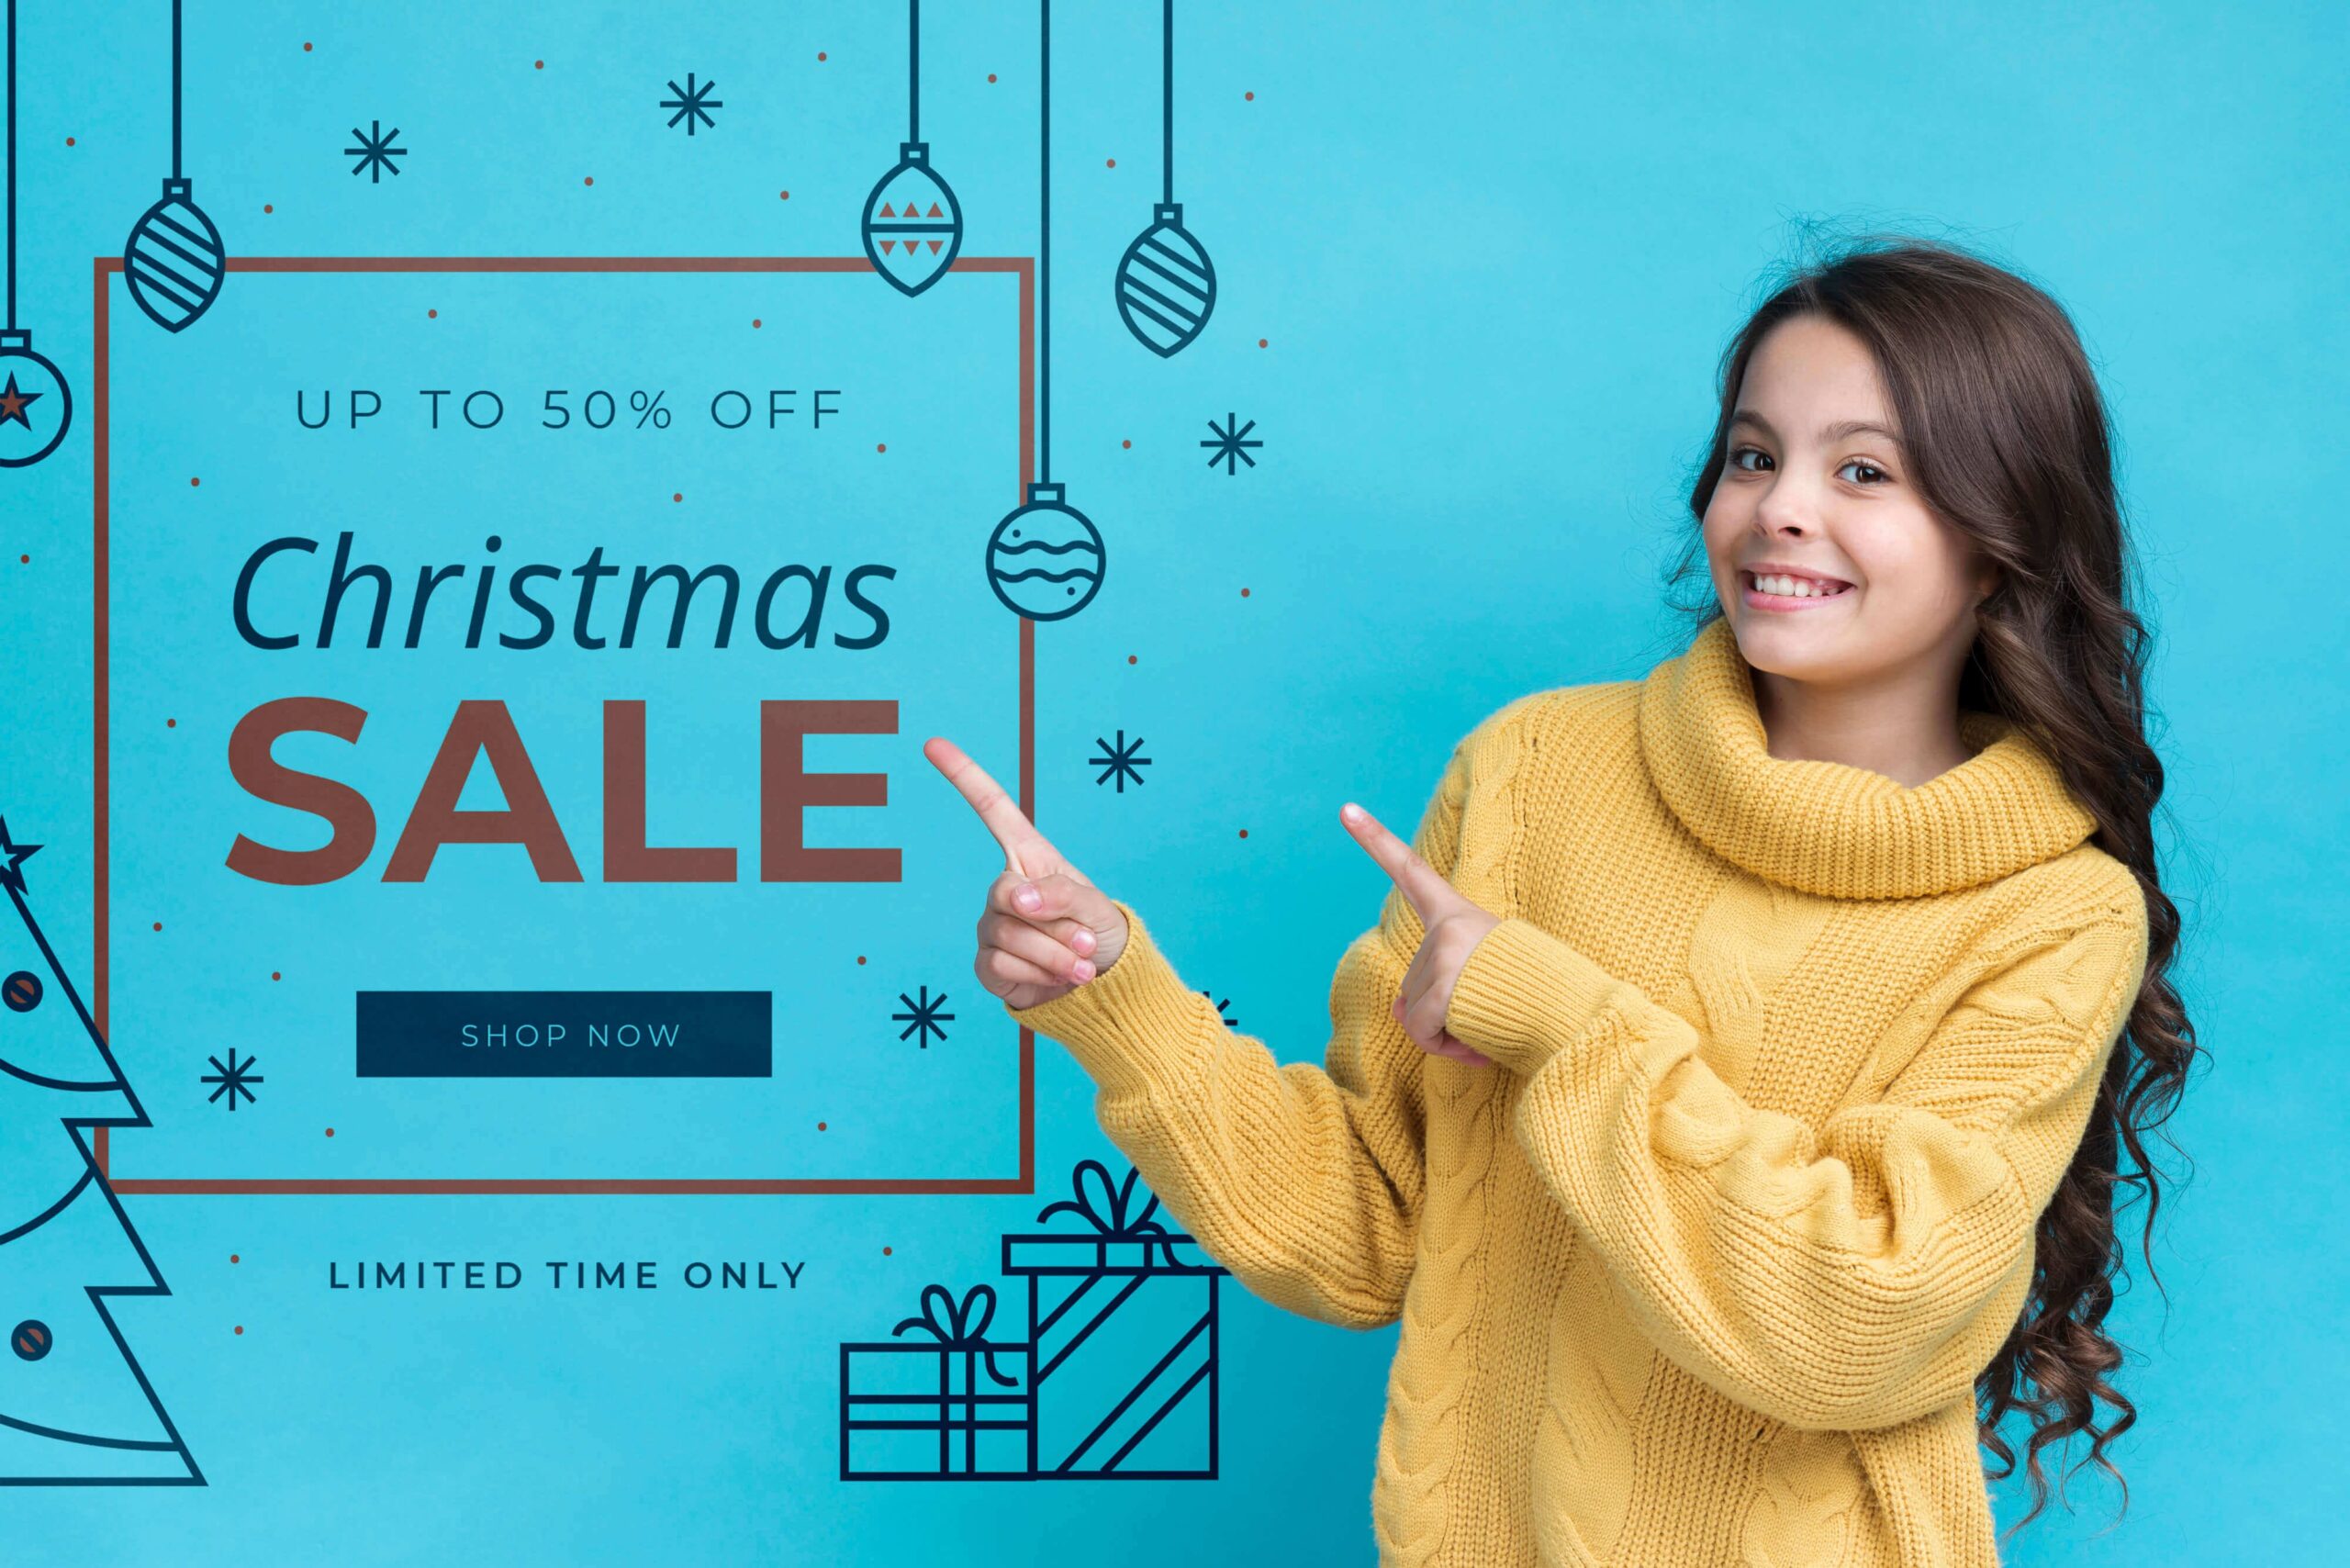 Optimize Your Christmas Marketing Campaign